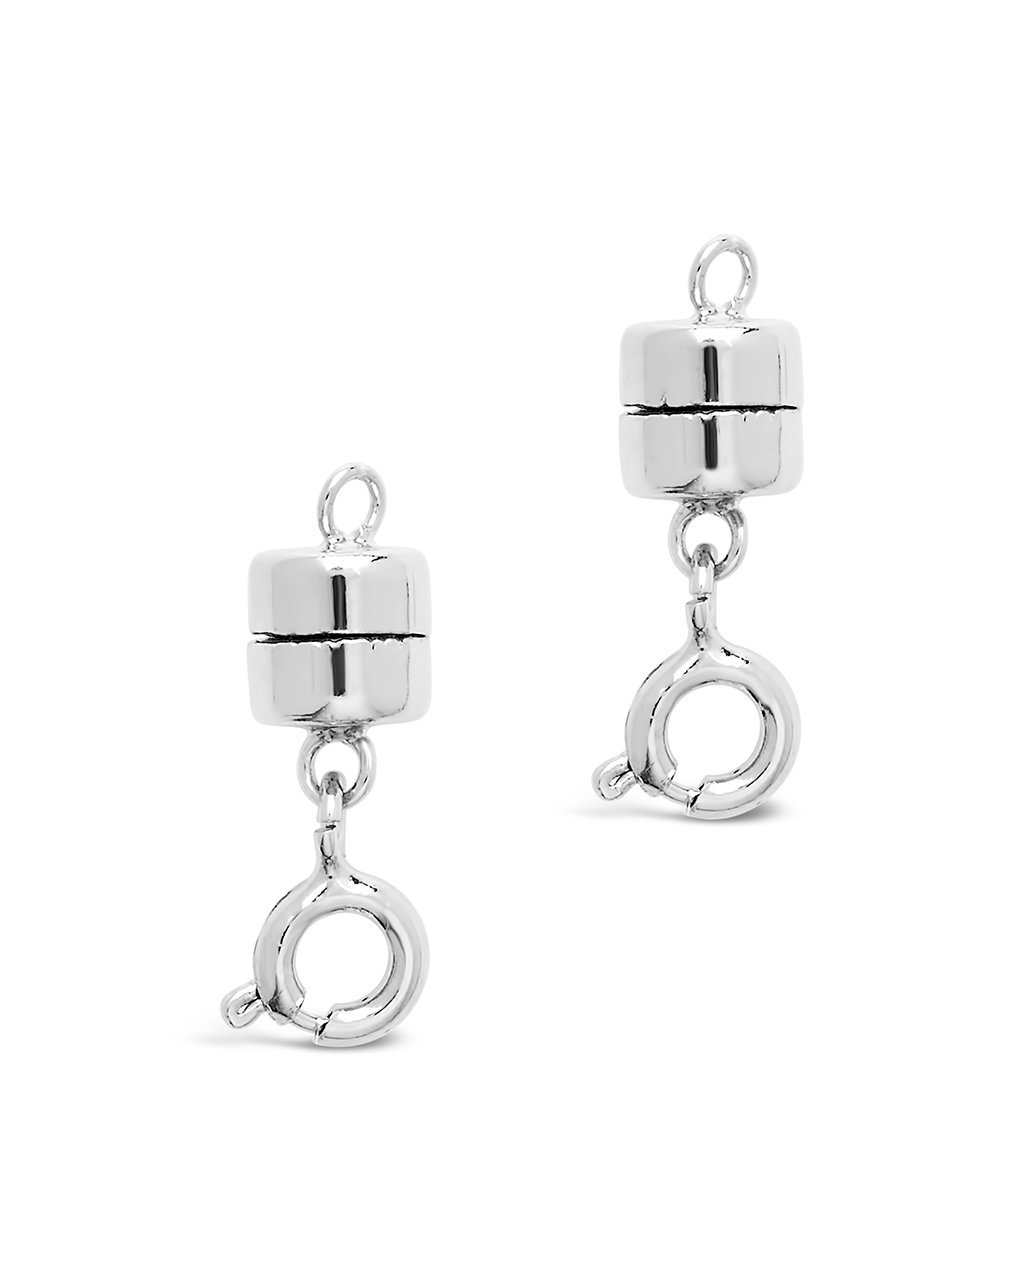 Magnetic Spring Ring Clasp - Sterling Forever